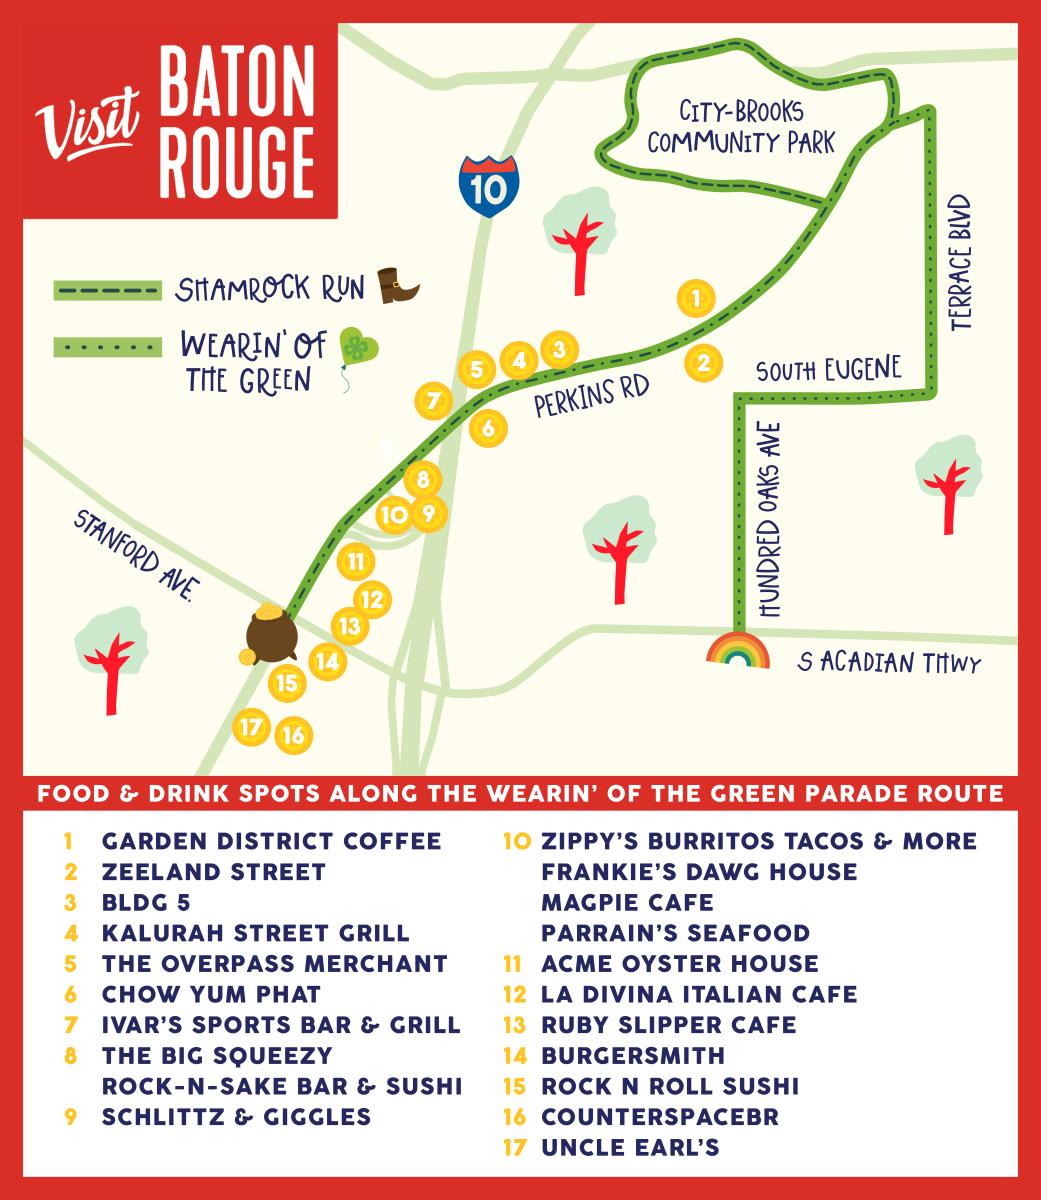 St. Patrick's Day Parade Route